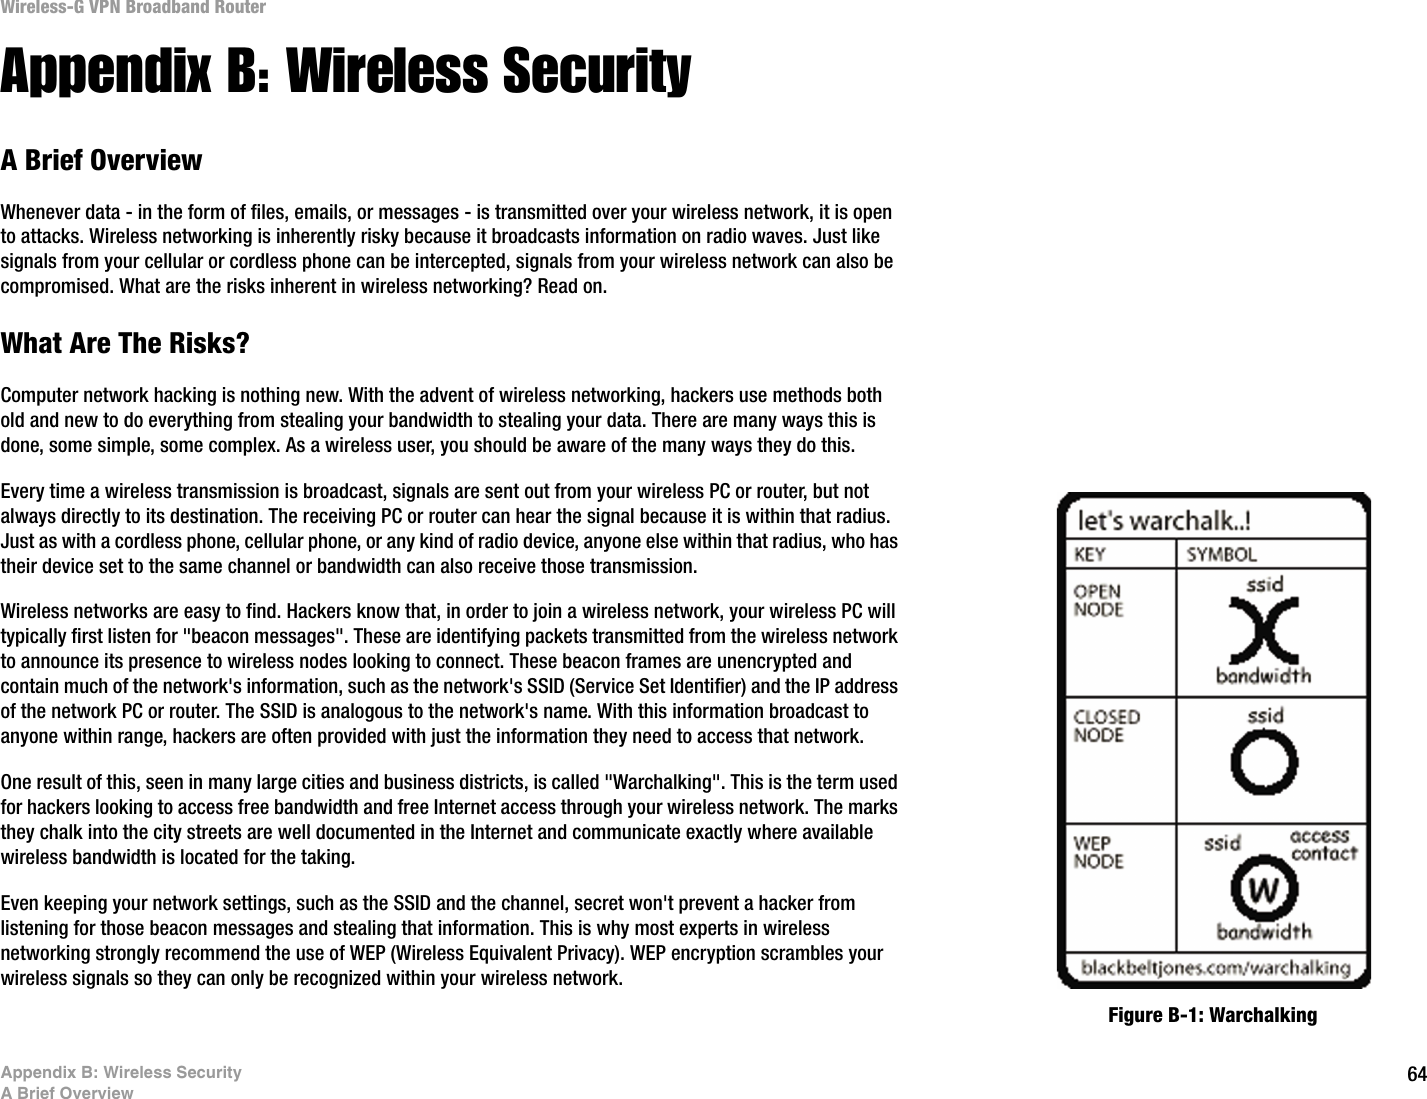 64Appendix B: Wireless SecurityA Brief OverviewWireless-G VPN Broadband RouterAppendix B: Wireless SecurityA Brief OverviewWhenever data - in the form of files, emails, or messages - is transmitted over your wireless network, it is open to attacks. Wireless networking is inherently risky because it broadcasts information on radio waves. Just like signals from your cellular or cordless phone can be intercepted, signals from your wireless network can also be compromised. What are the risks inherent in wireless networking? Read on.What Are The Risks?Computer network hacking is nothing new. With the advent of wireless networking, hackers use methods both old and new to do everything from stealing your bandwidth to stealing your data. There are many ways this is done, some simple, some complex. As a wireless user, you should be aware of the many ways they do this.Every time a wireless transmission is broadcast, signals are sent out from your wireless PC or router, but not always directly to its destination. The receiving PC or router can hear the signal because it is within that radius. Just as with a cordless phone, cellular phone, or any kind of radio device, anyone else within that radius, who has their device set to the same channel or bandwidth can also receive those transmission.Wireless networks are easy to find. Hackers know that, in order to join a wireless network, your wireless PC will typically first listen for &quot;beacon messages&quot;. These are identifying packets transmitted from the wireless network to announce its presence to wireless nodes looking to connect. These beacon frames are unencrypted and contain much of the network&apos;s information, such as the network&apos;s SSID (Service Set Identifier) and the IP address of the network PC or router. The SSID is analogous to the network&apos;s name. With this information broadcast to anyone within range, hackers are often provided with just the information they need to access that network.One result of this, seen in many large cities and business districts, is called &quot;Warchalking&quot;. This is the term used for hackers looking to access free bandwidth and free Internet access through your wireless network. The marks they chalk into the city streets are well documented in the Internet and communicate exactly where available wireless bandwidth is located for the taking.Even keeping your network settings, such as the SSID and the channel, secret won&apos;t prevent a hacker from listening for those beacon messages and stealing that information. This is why most experts in wireless networking strongly recommend the use of WEP (Wireless Equivalent Privacy). WEP encryption scrambles your wireless signals so they can only be recognized within your wireless network.Figure B-1: Warchalking